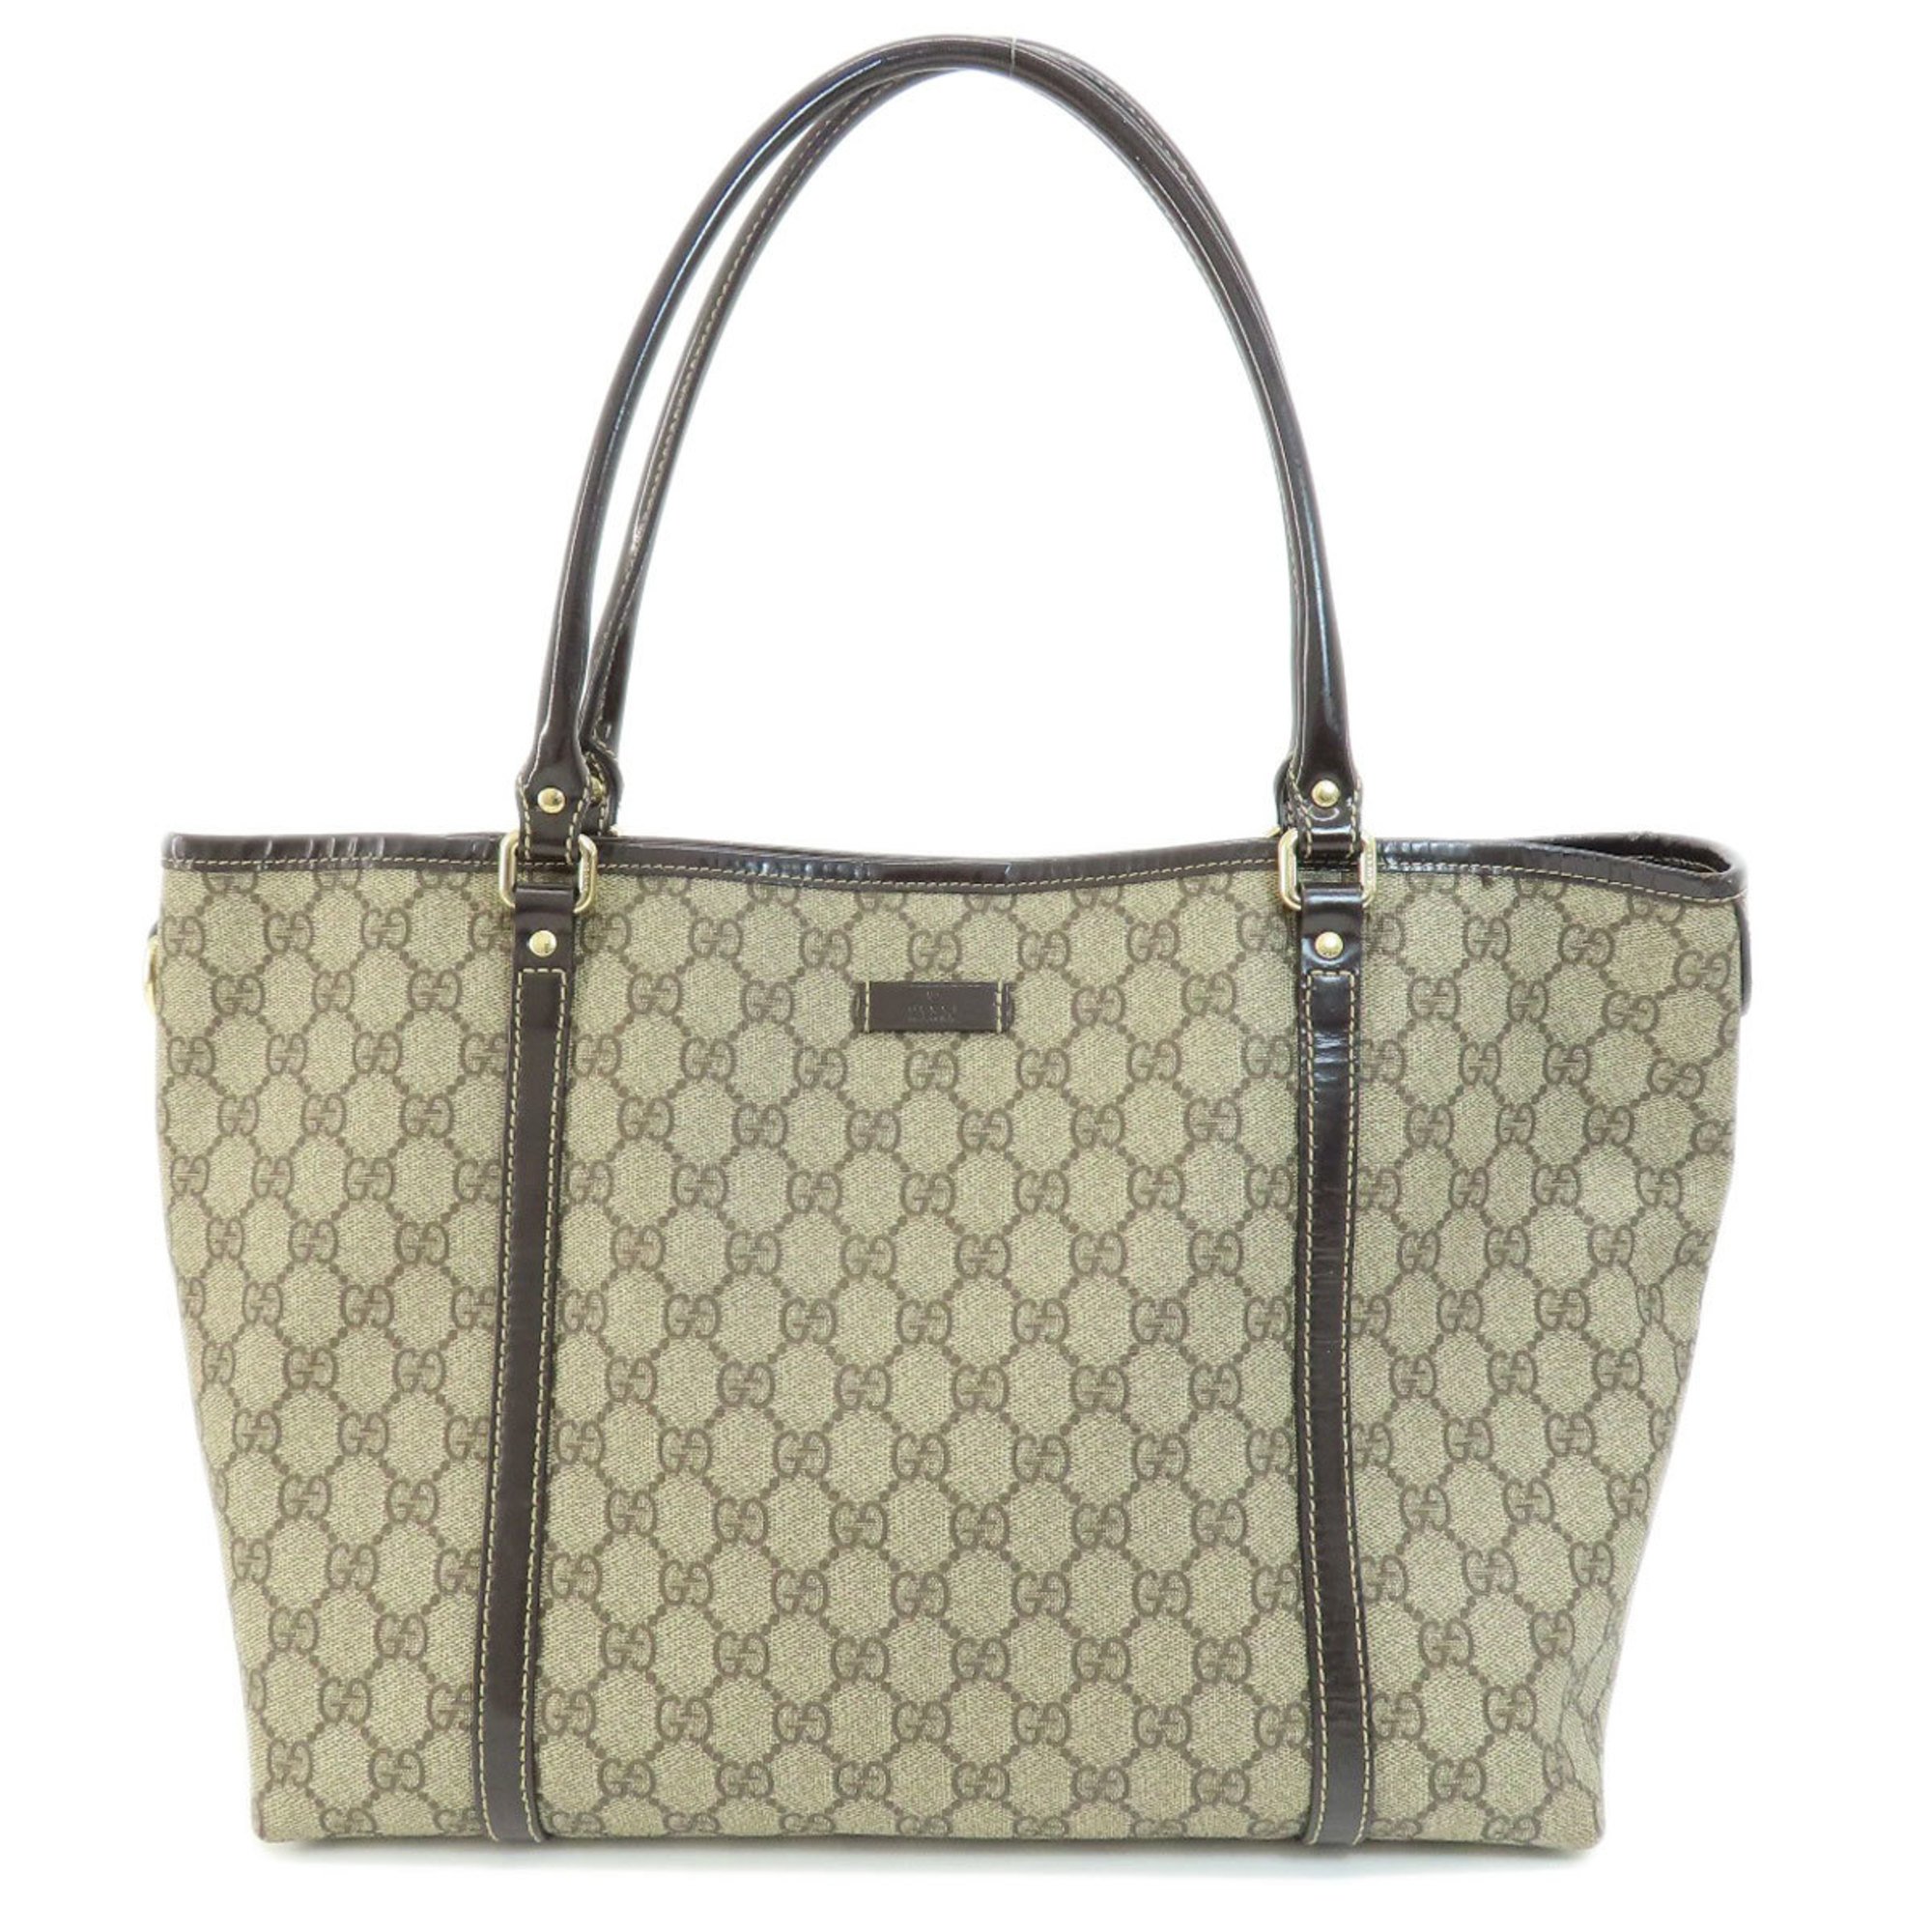 Gucci 197953 GG Tote Bag Leather Women's